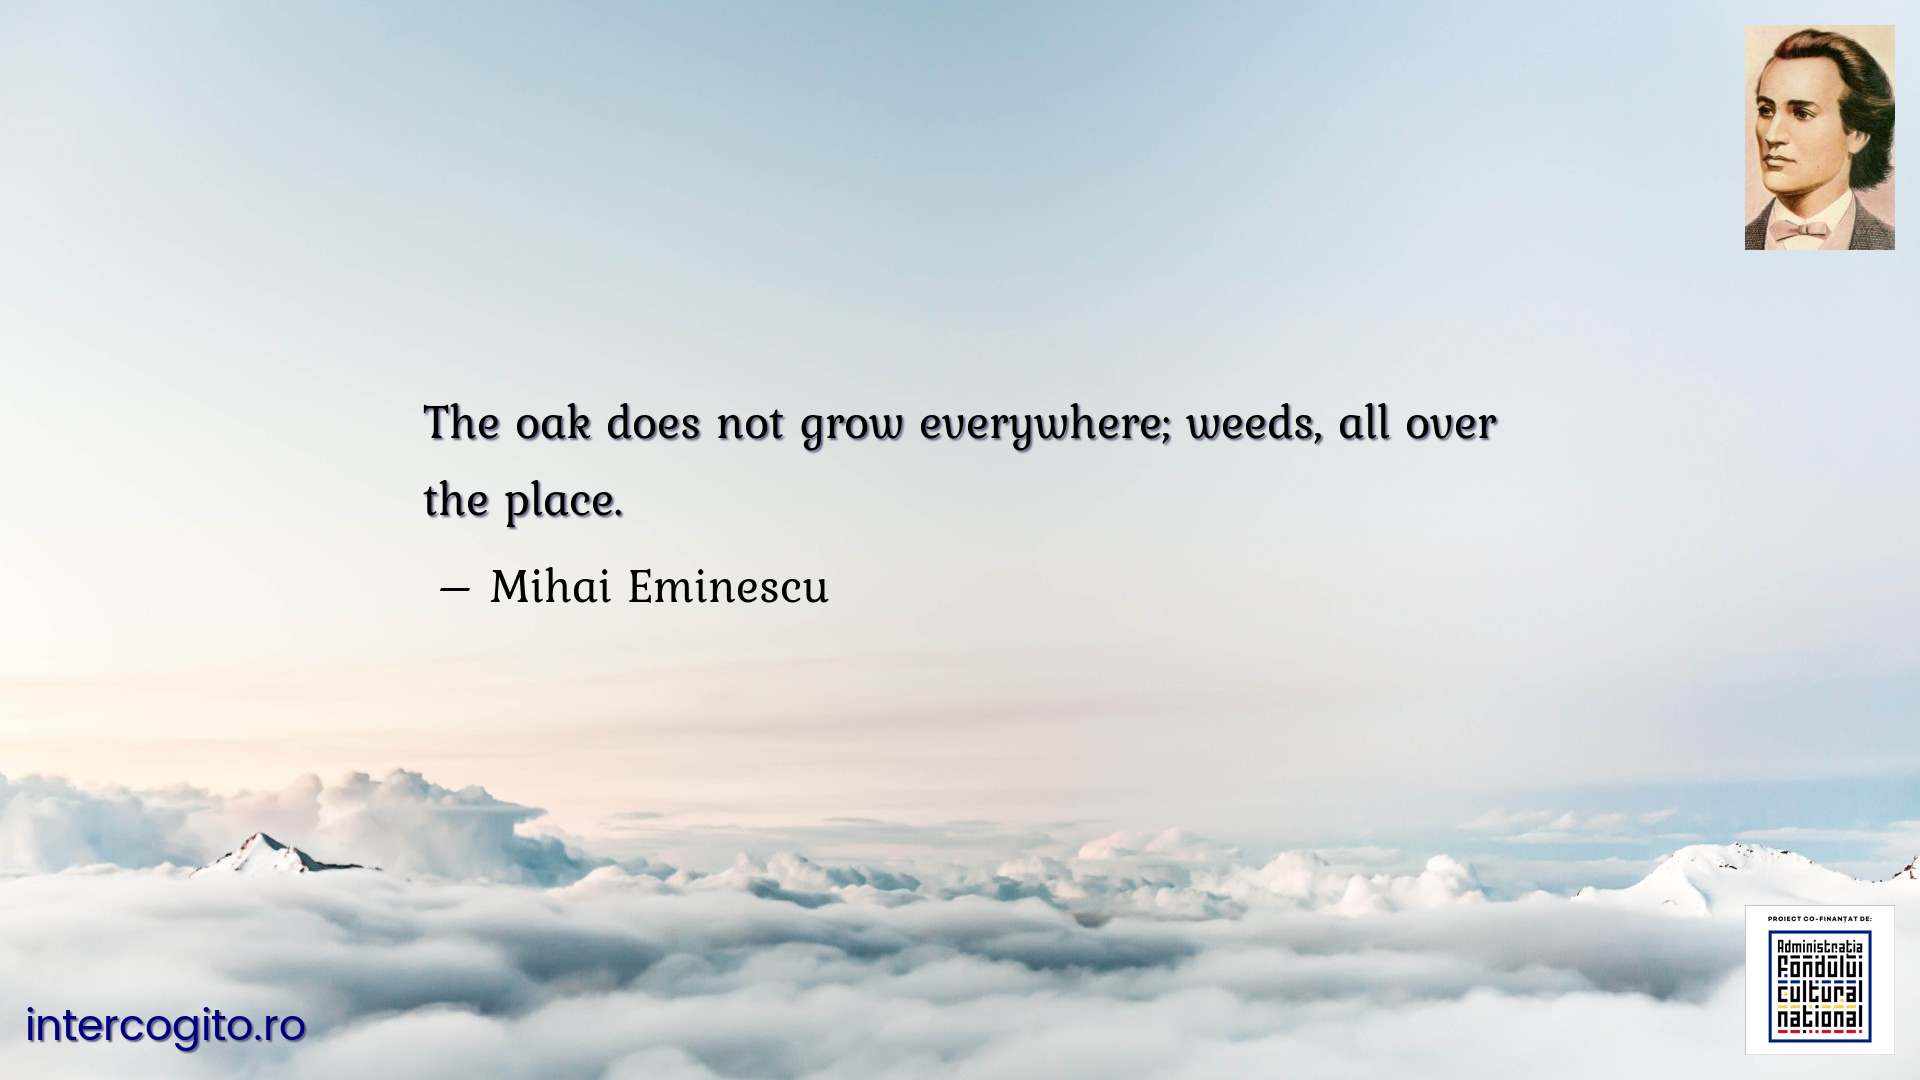 The oak does not grow everywhere; weeds, all over the place.